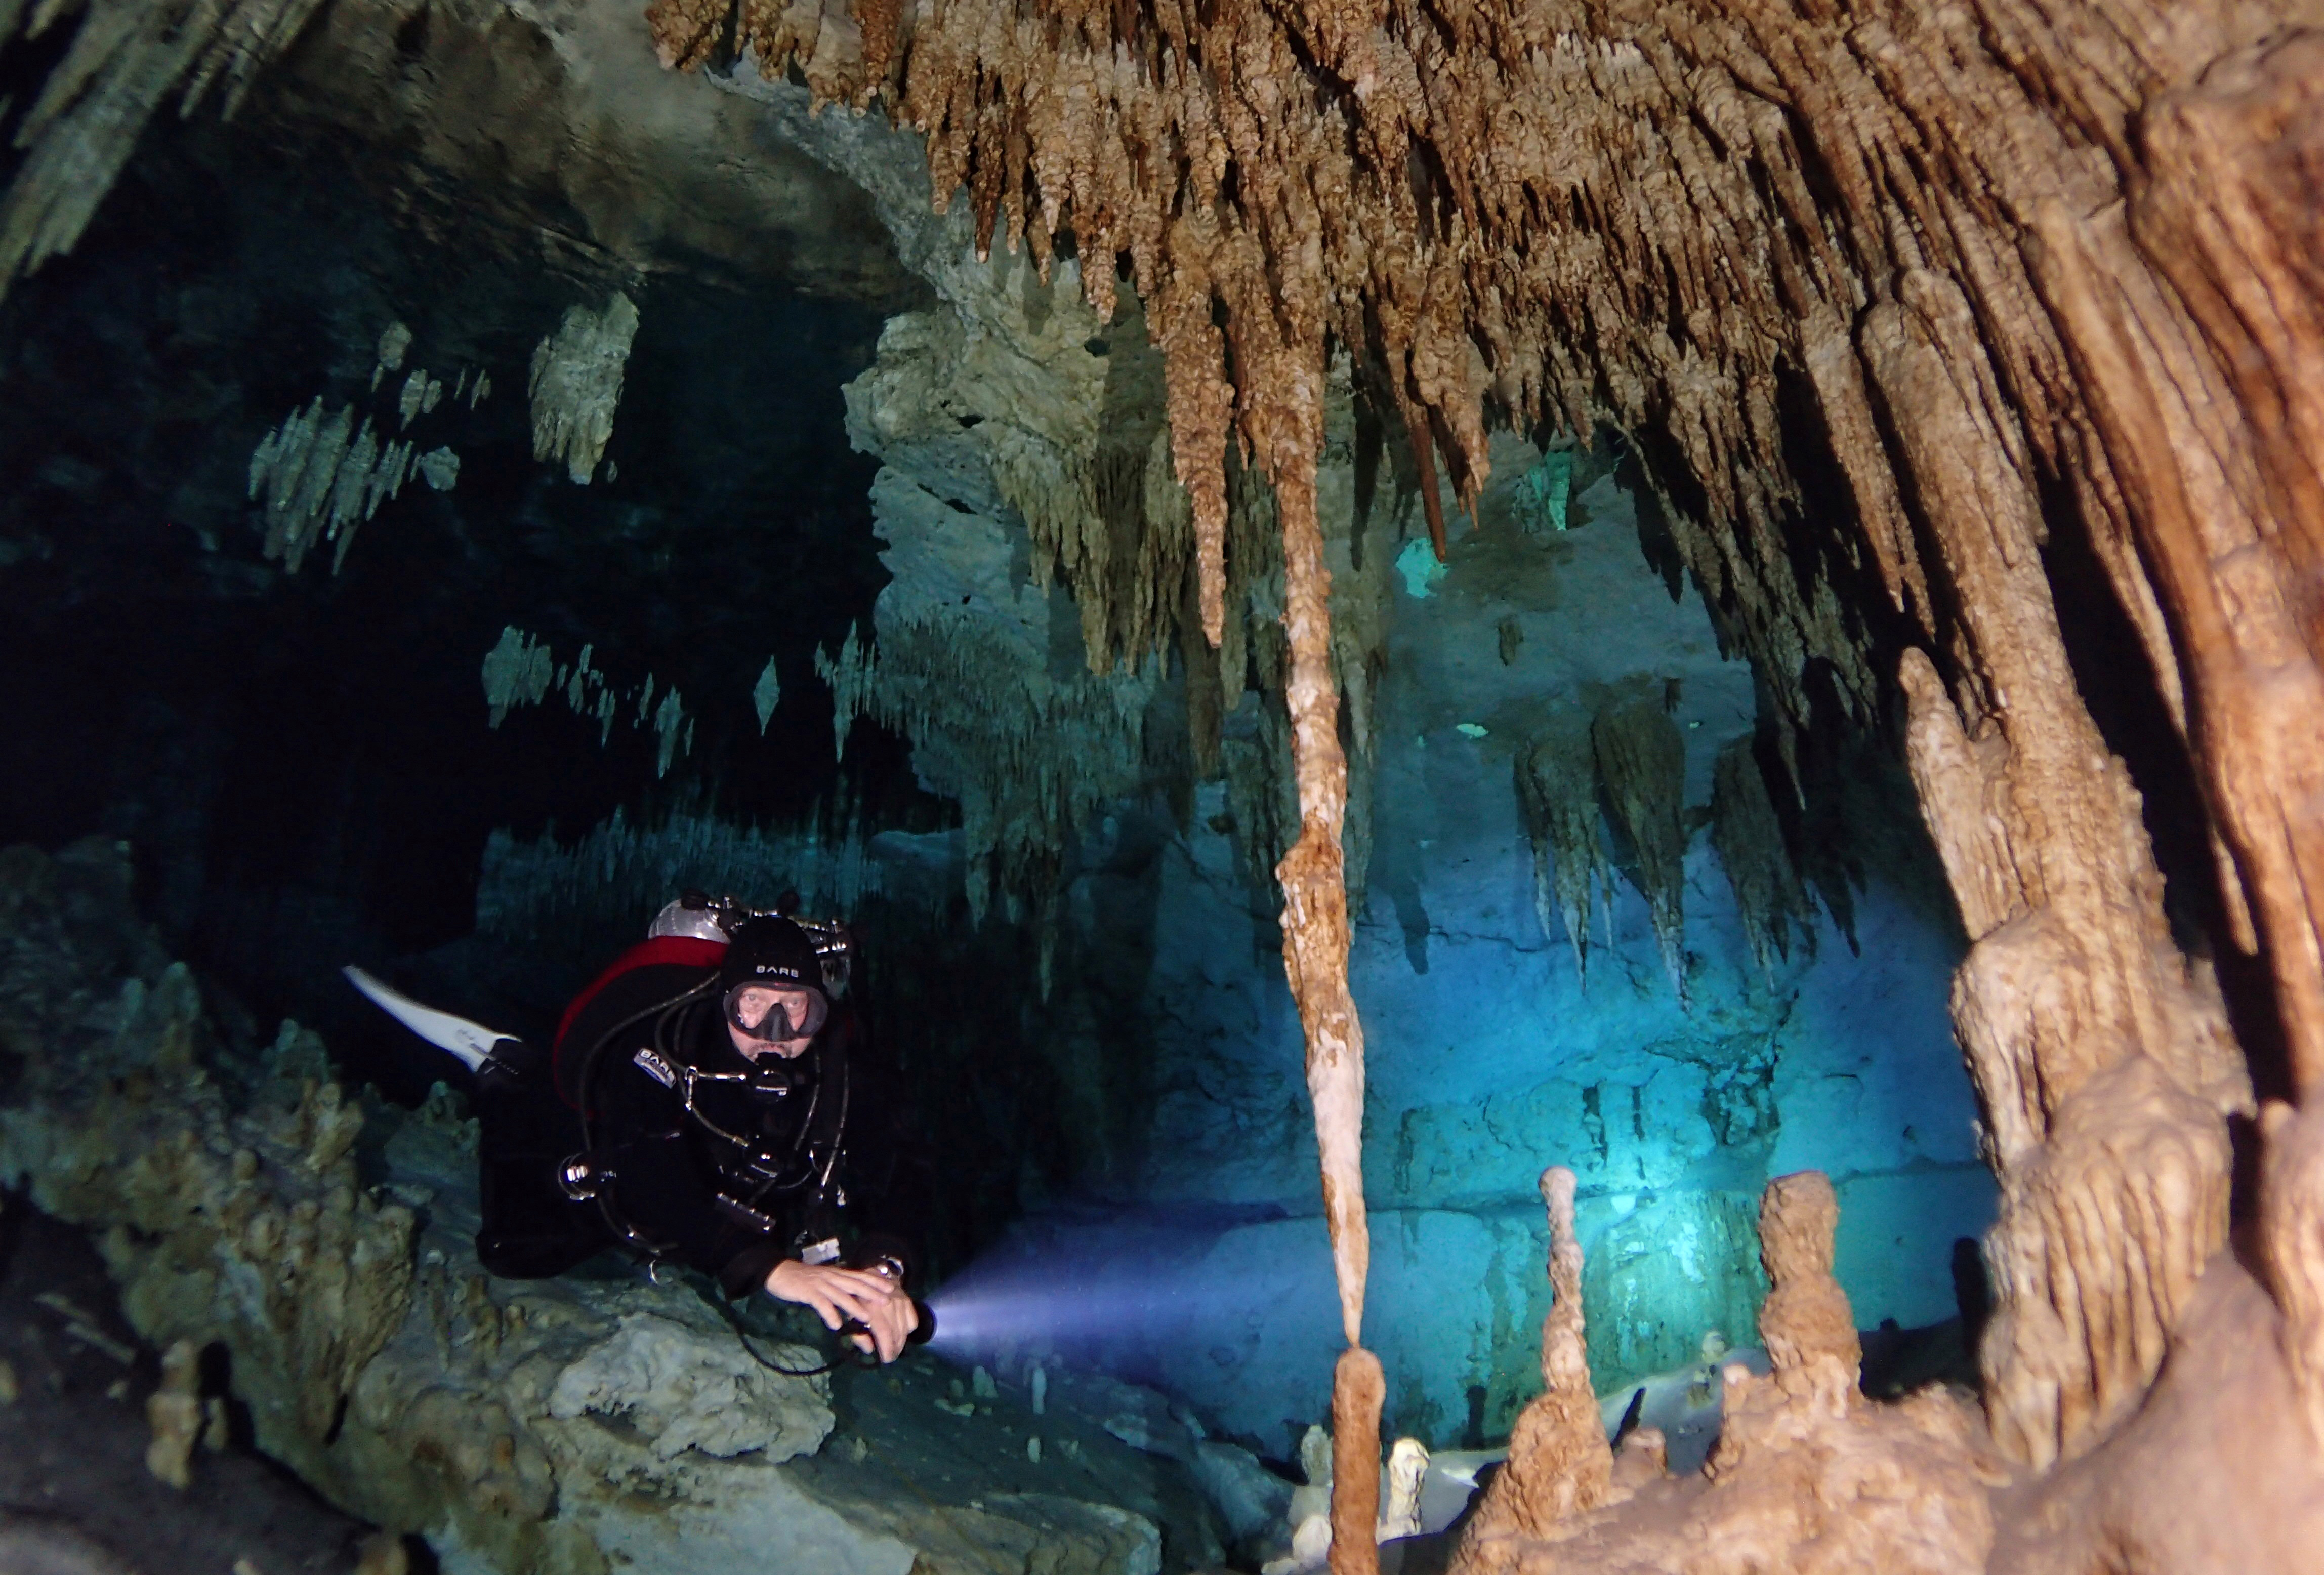 Cave diver in Cenote Taak Bi Ha, Tulum, Mexico. Photo by Ivone Bender